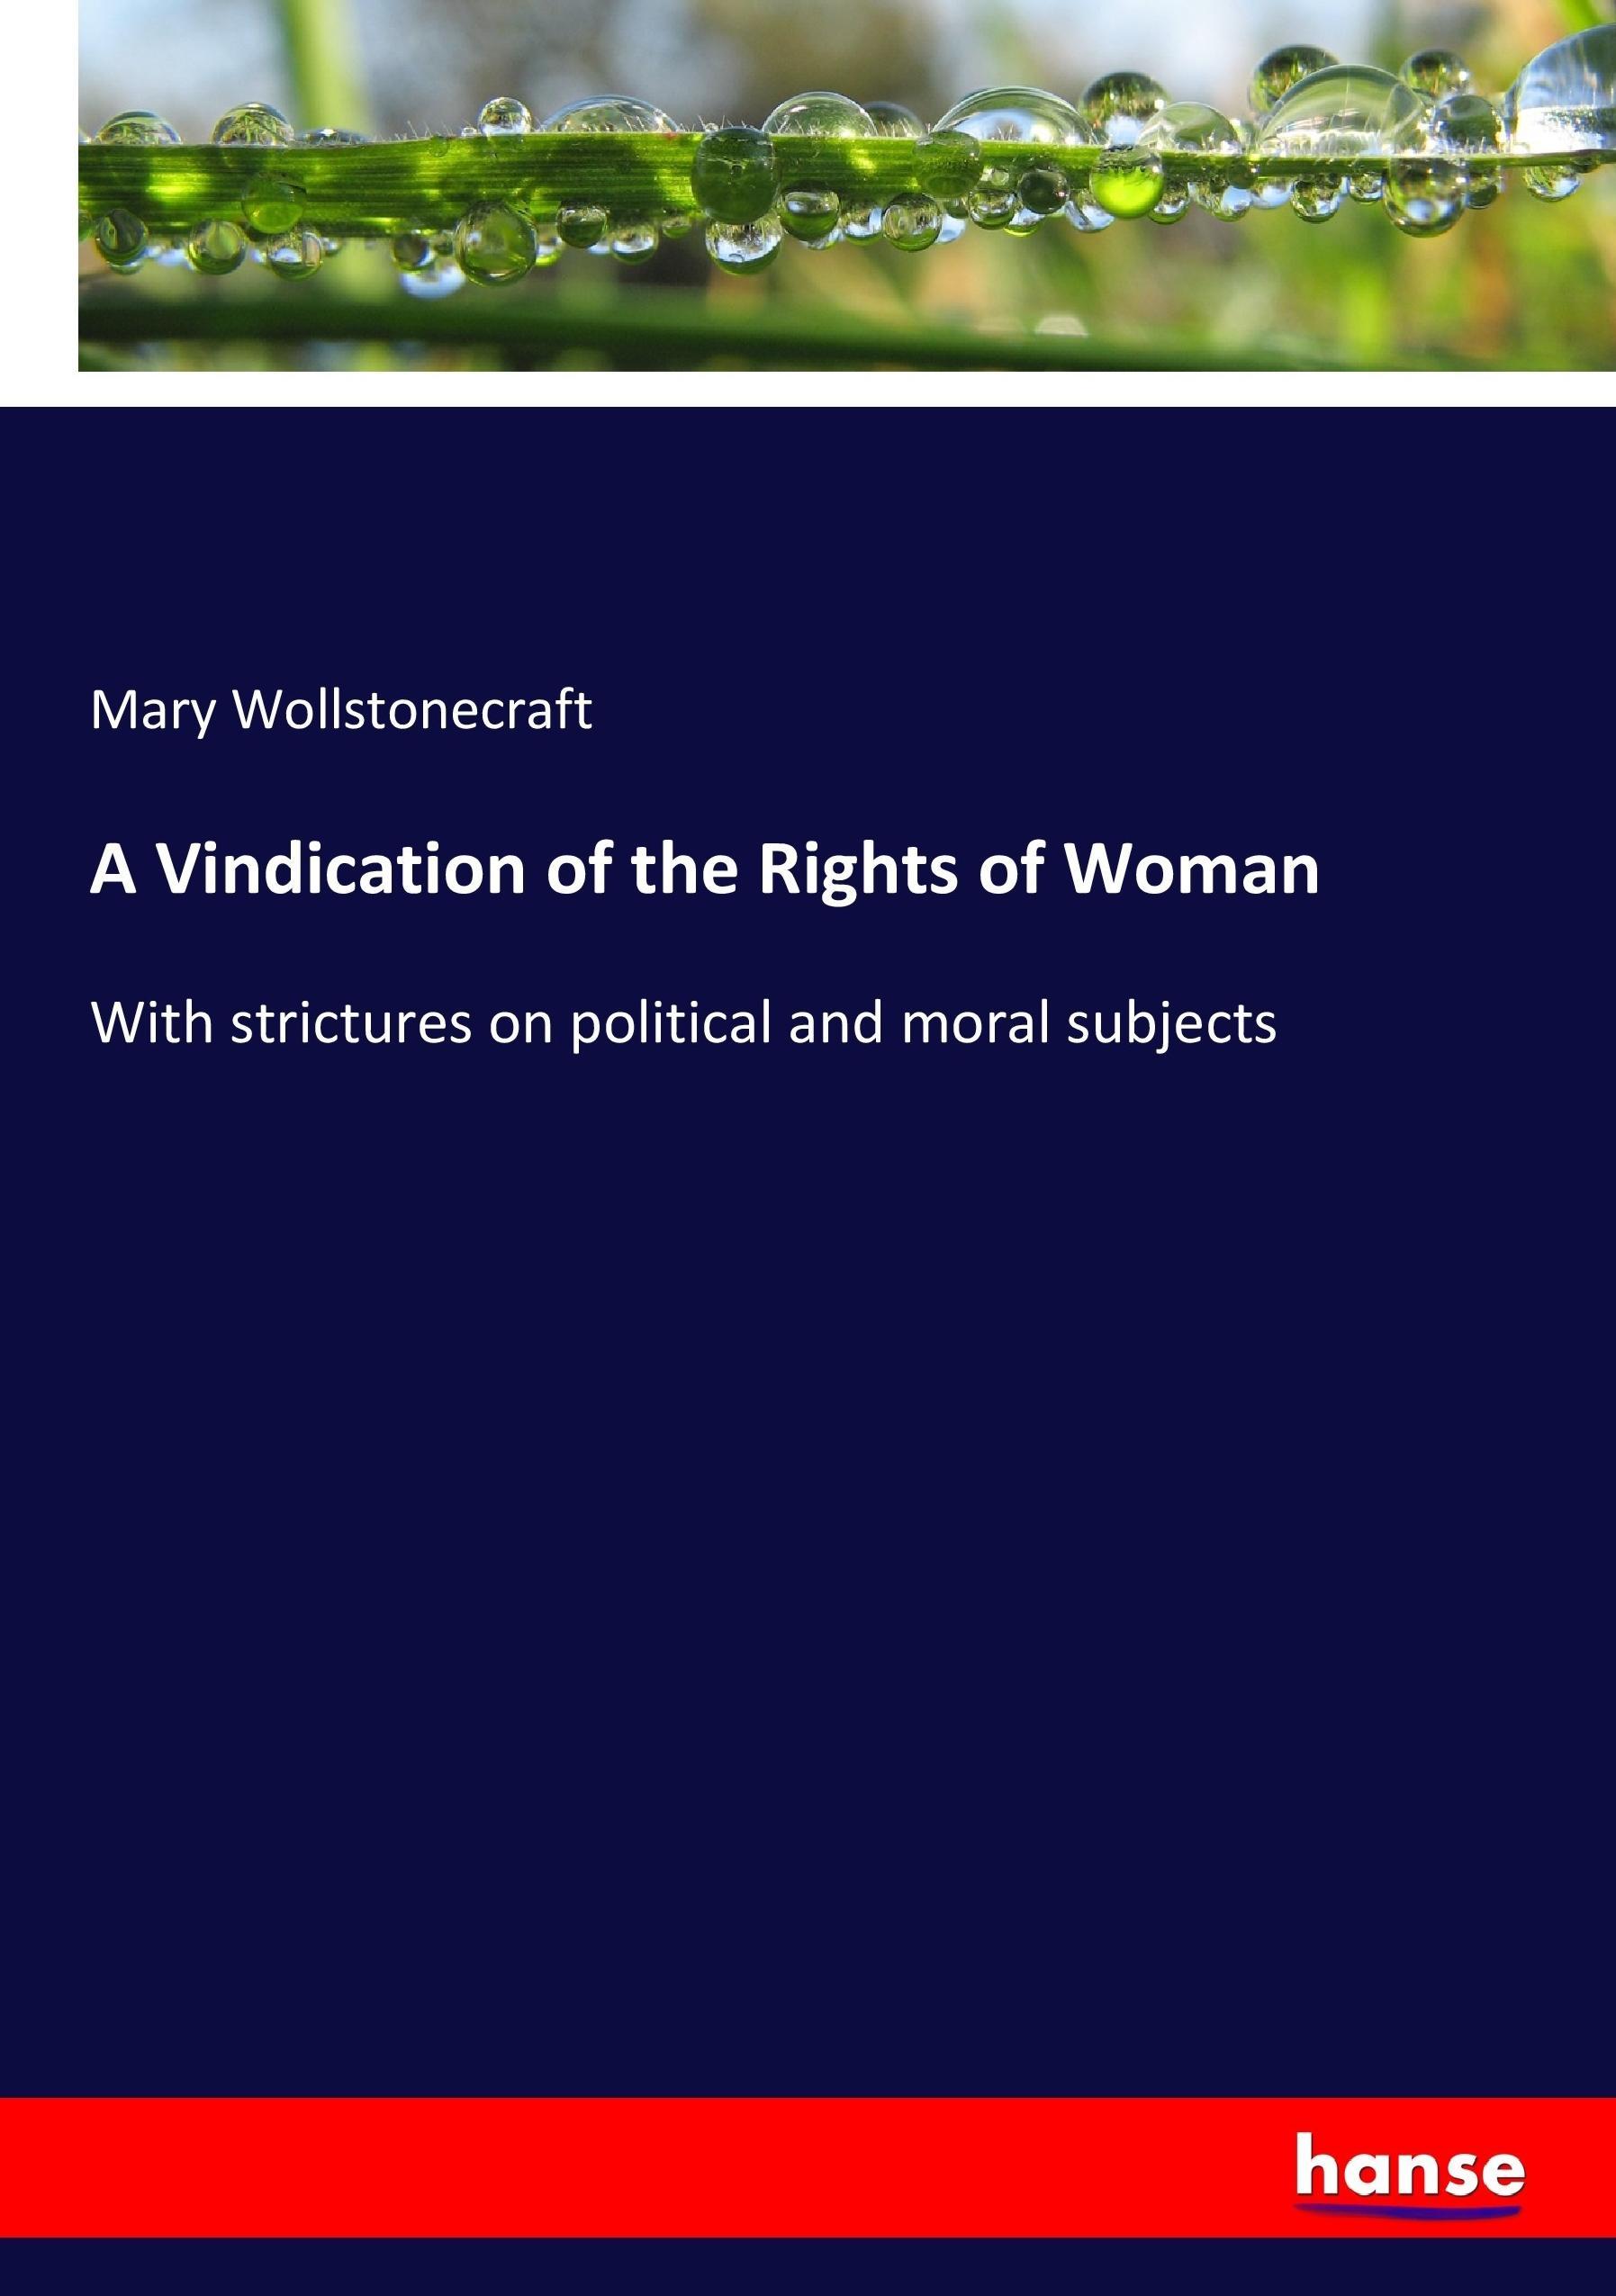 A Vindication of the Rights of Woman | With strictures on political and moral subjects | Mary Wollstonecraft | Taschenbuch | Paperback | 344 S. | Englisch | 2017 | hansebooks | EAN 9783337068523 - Wollstonecraft, Mary